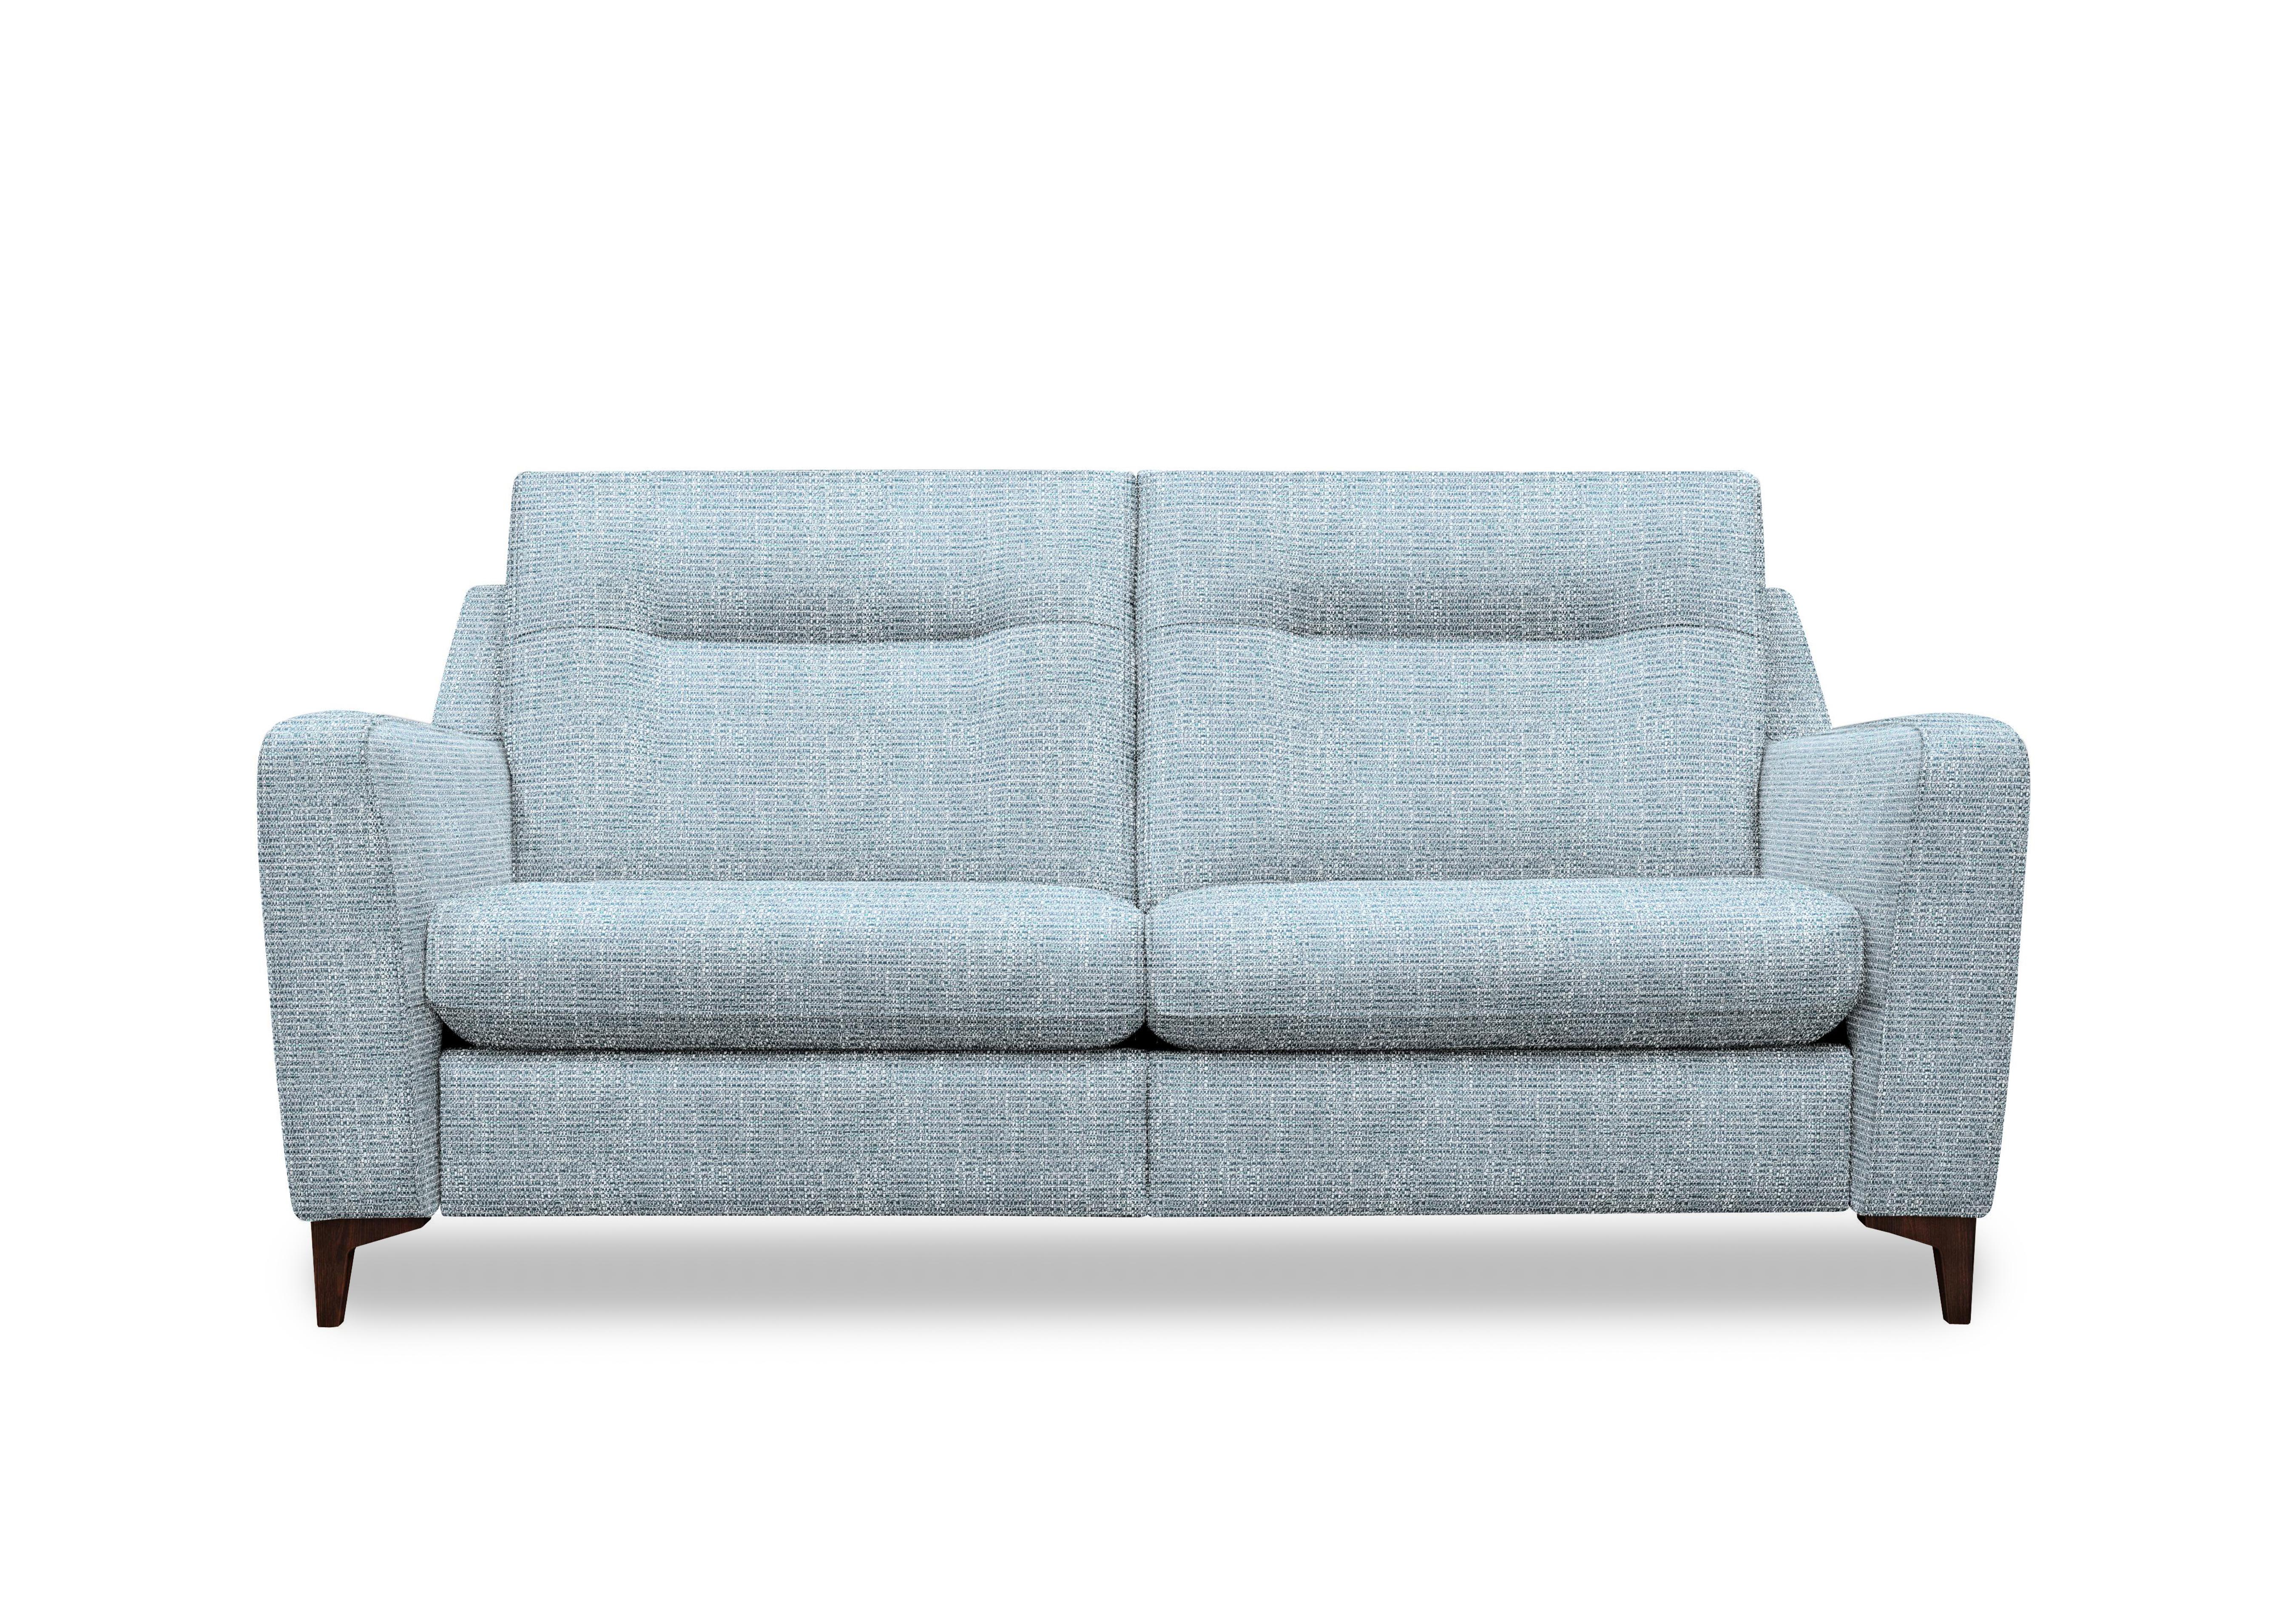 Arlo 3 Seater Fabric Sofa in B133 Libby Sky Wal Ft on Furniture Village